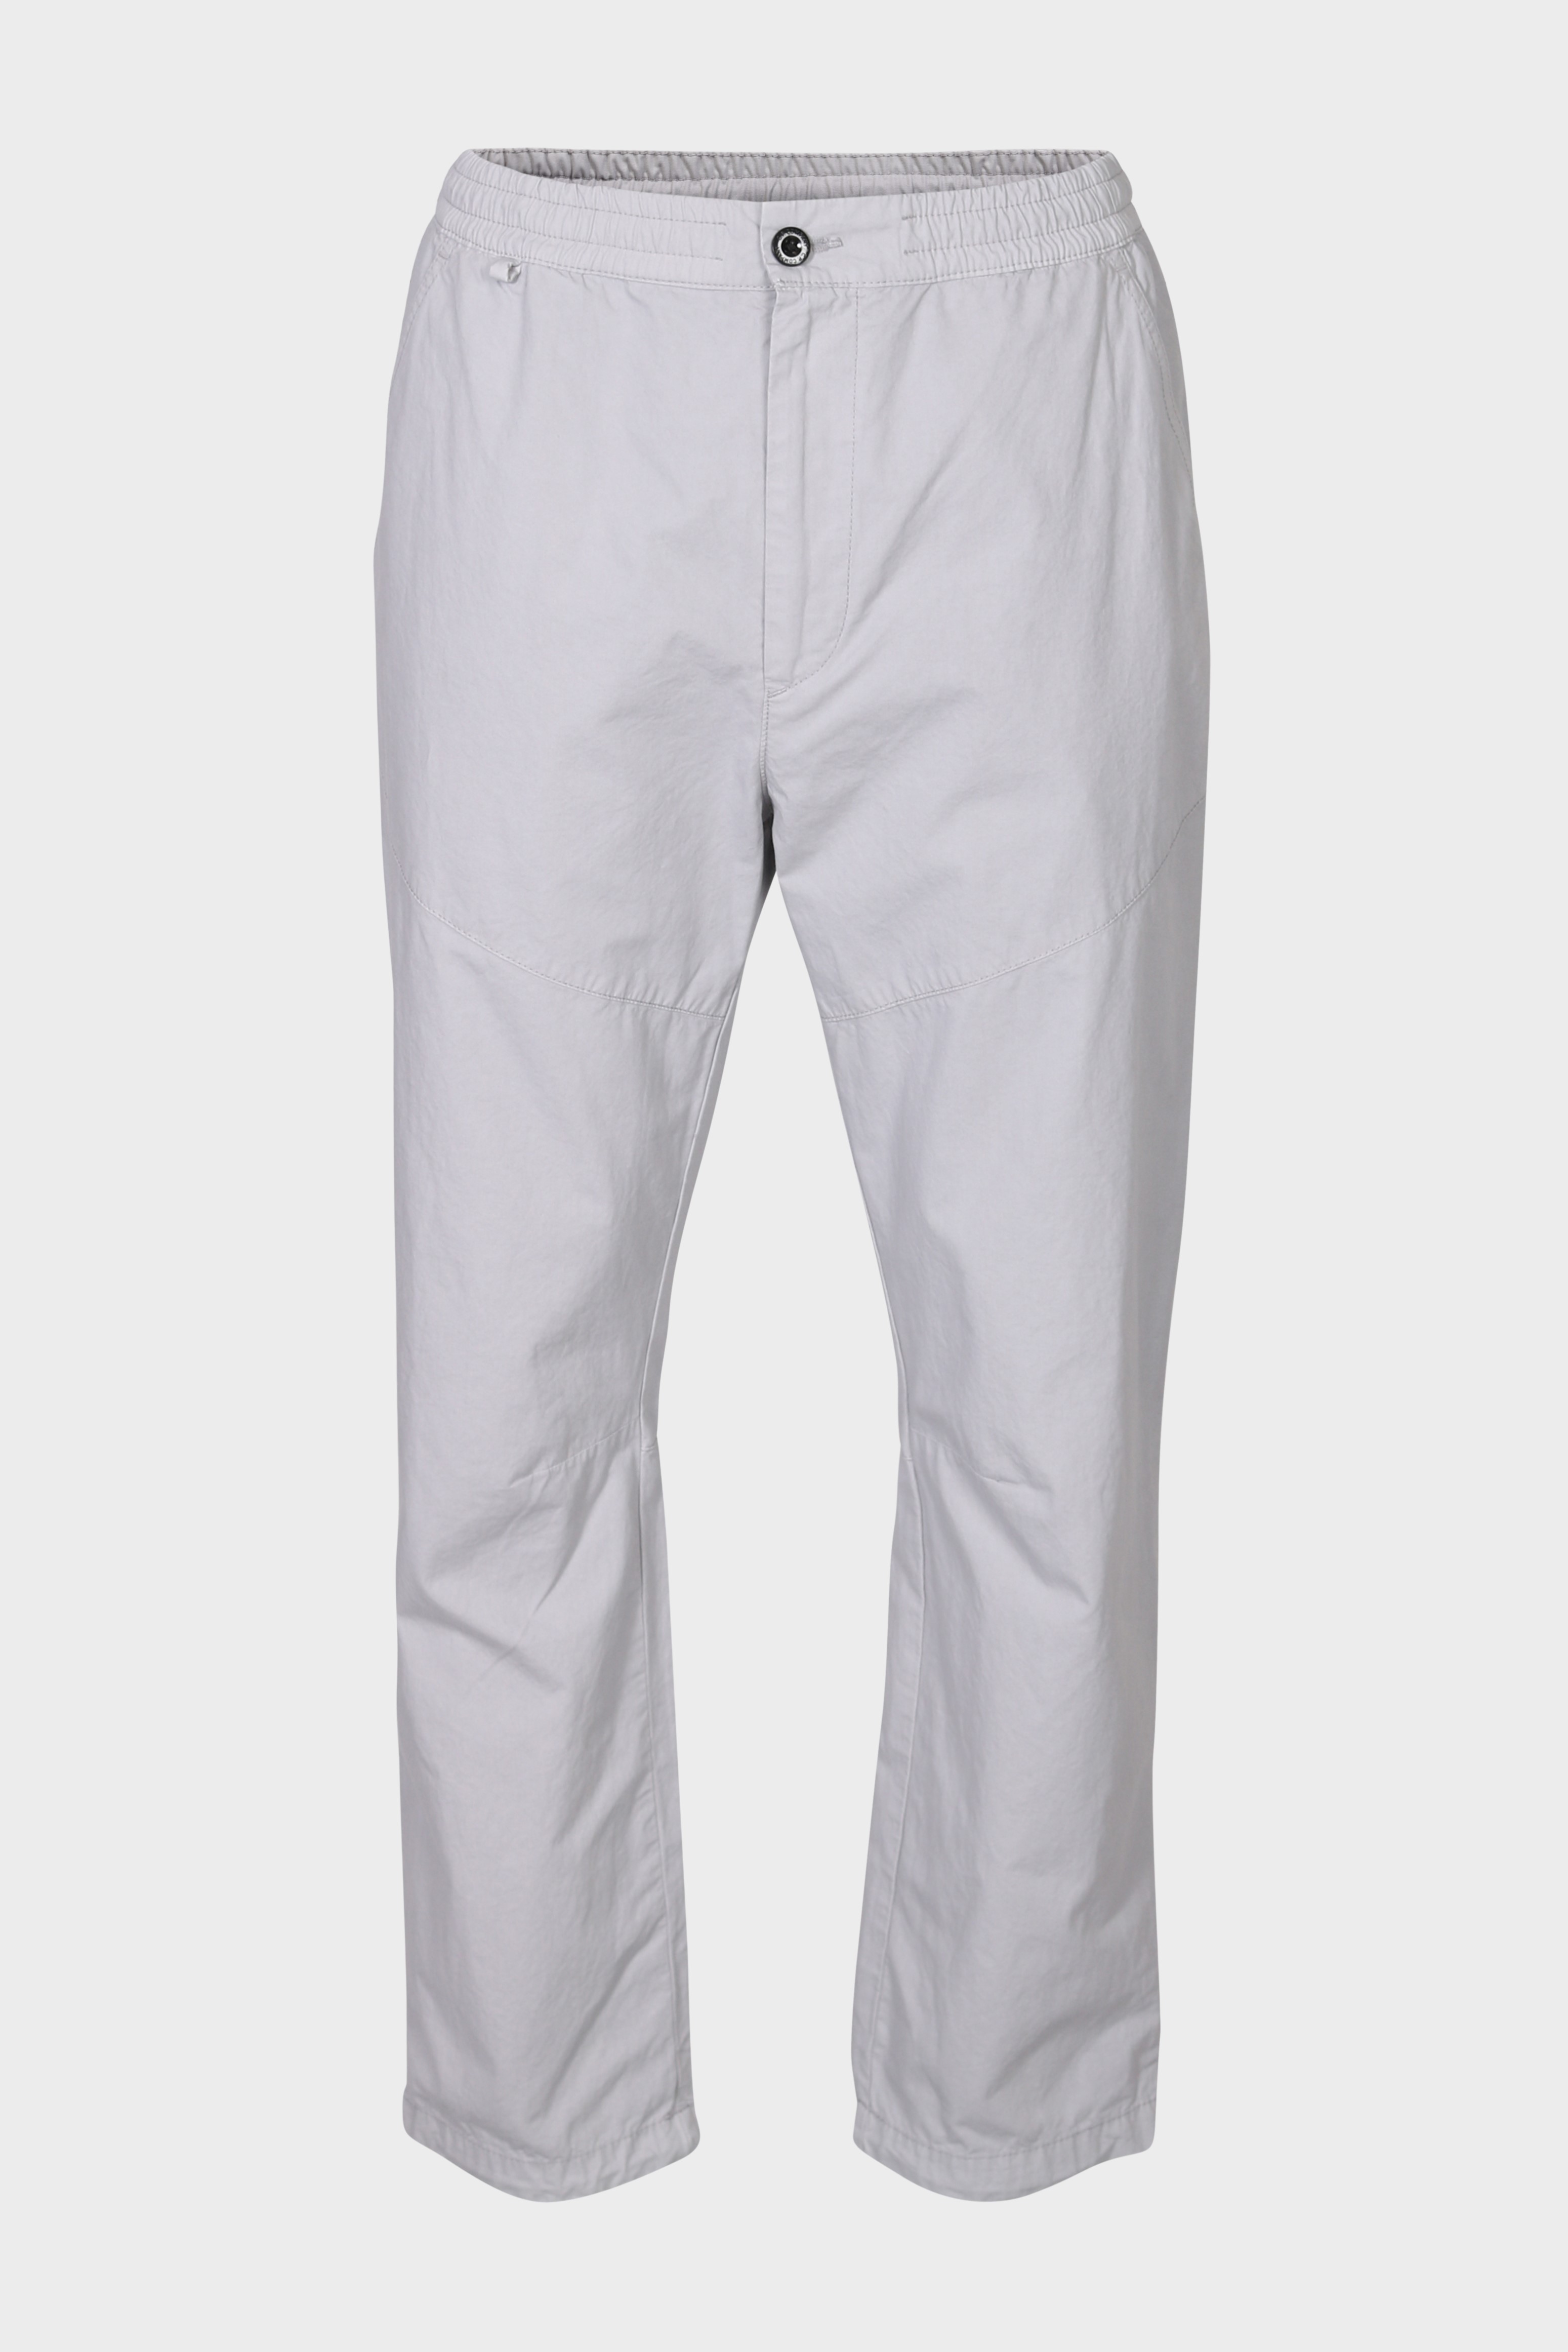 C.P. COMPANY Worker Pant in Drizzle Grey 54